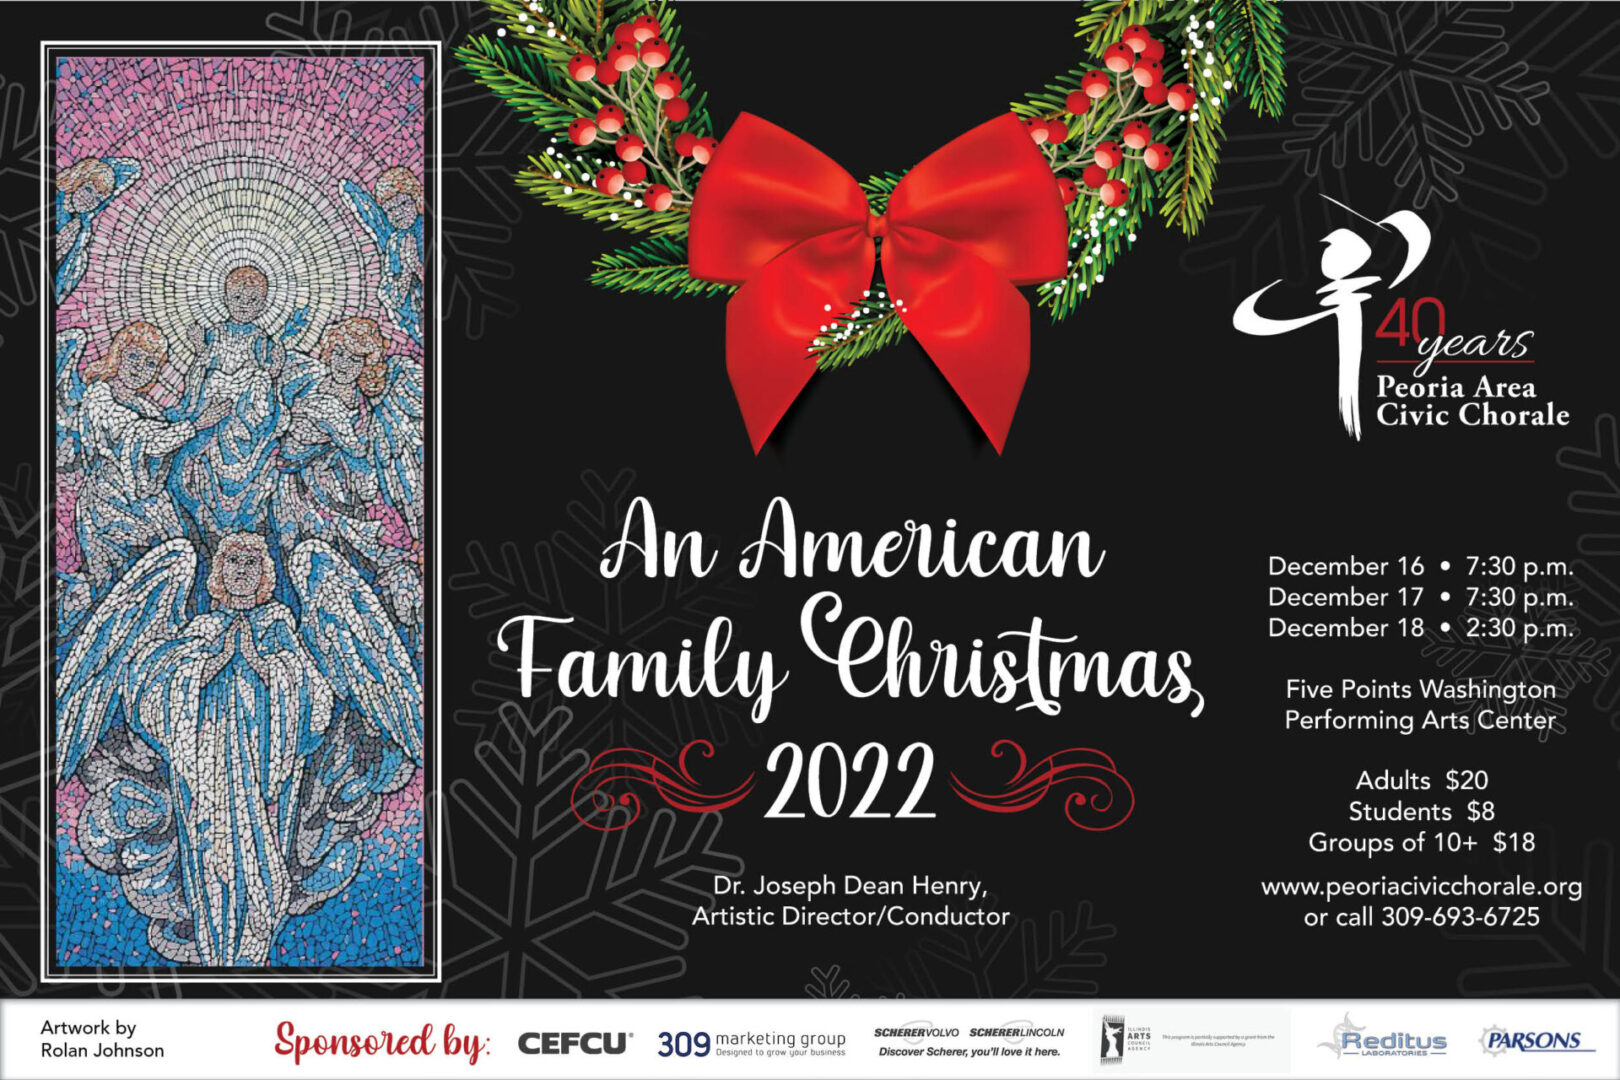 An American Family Christmas 2022 event flyer